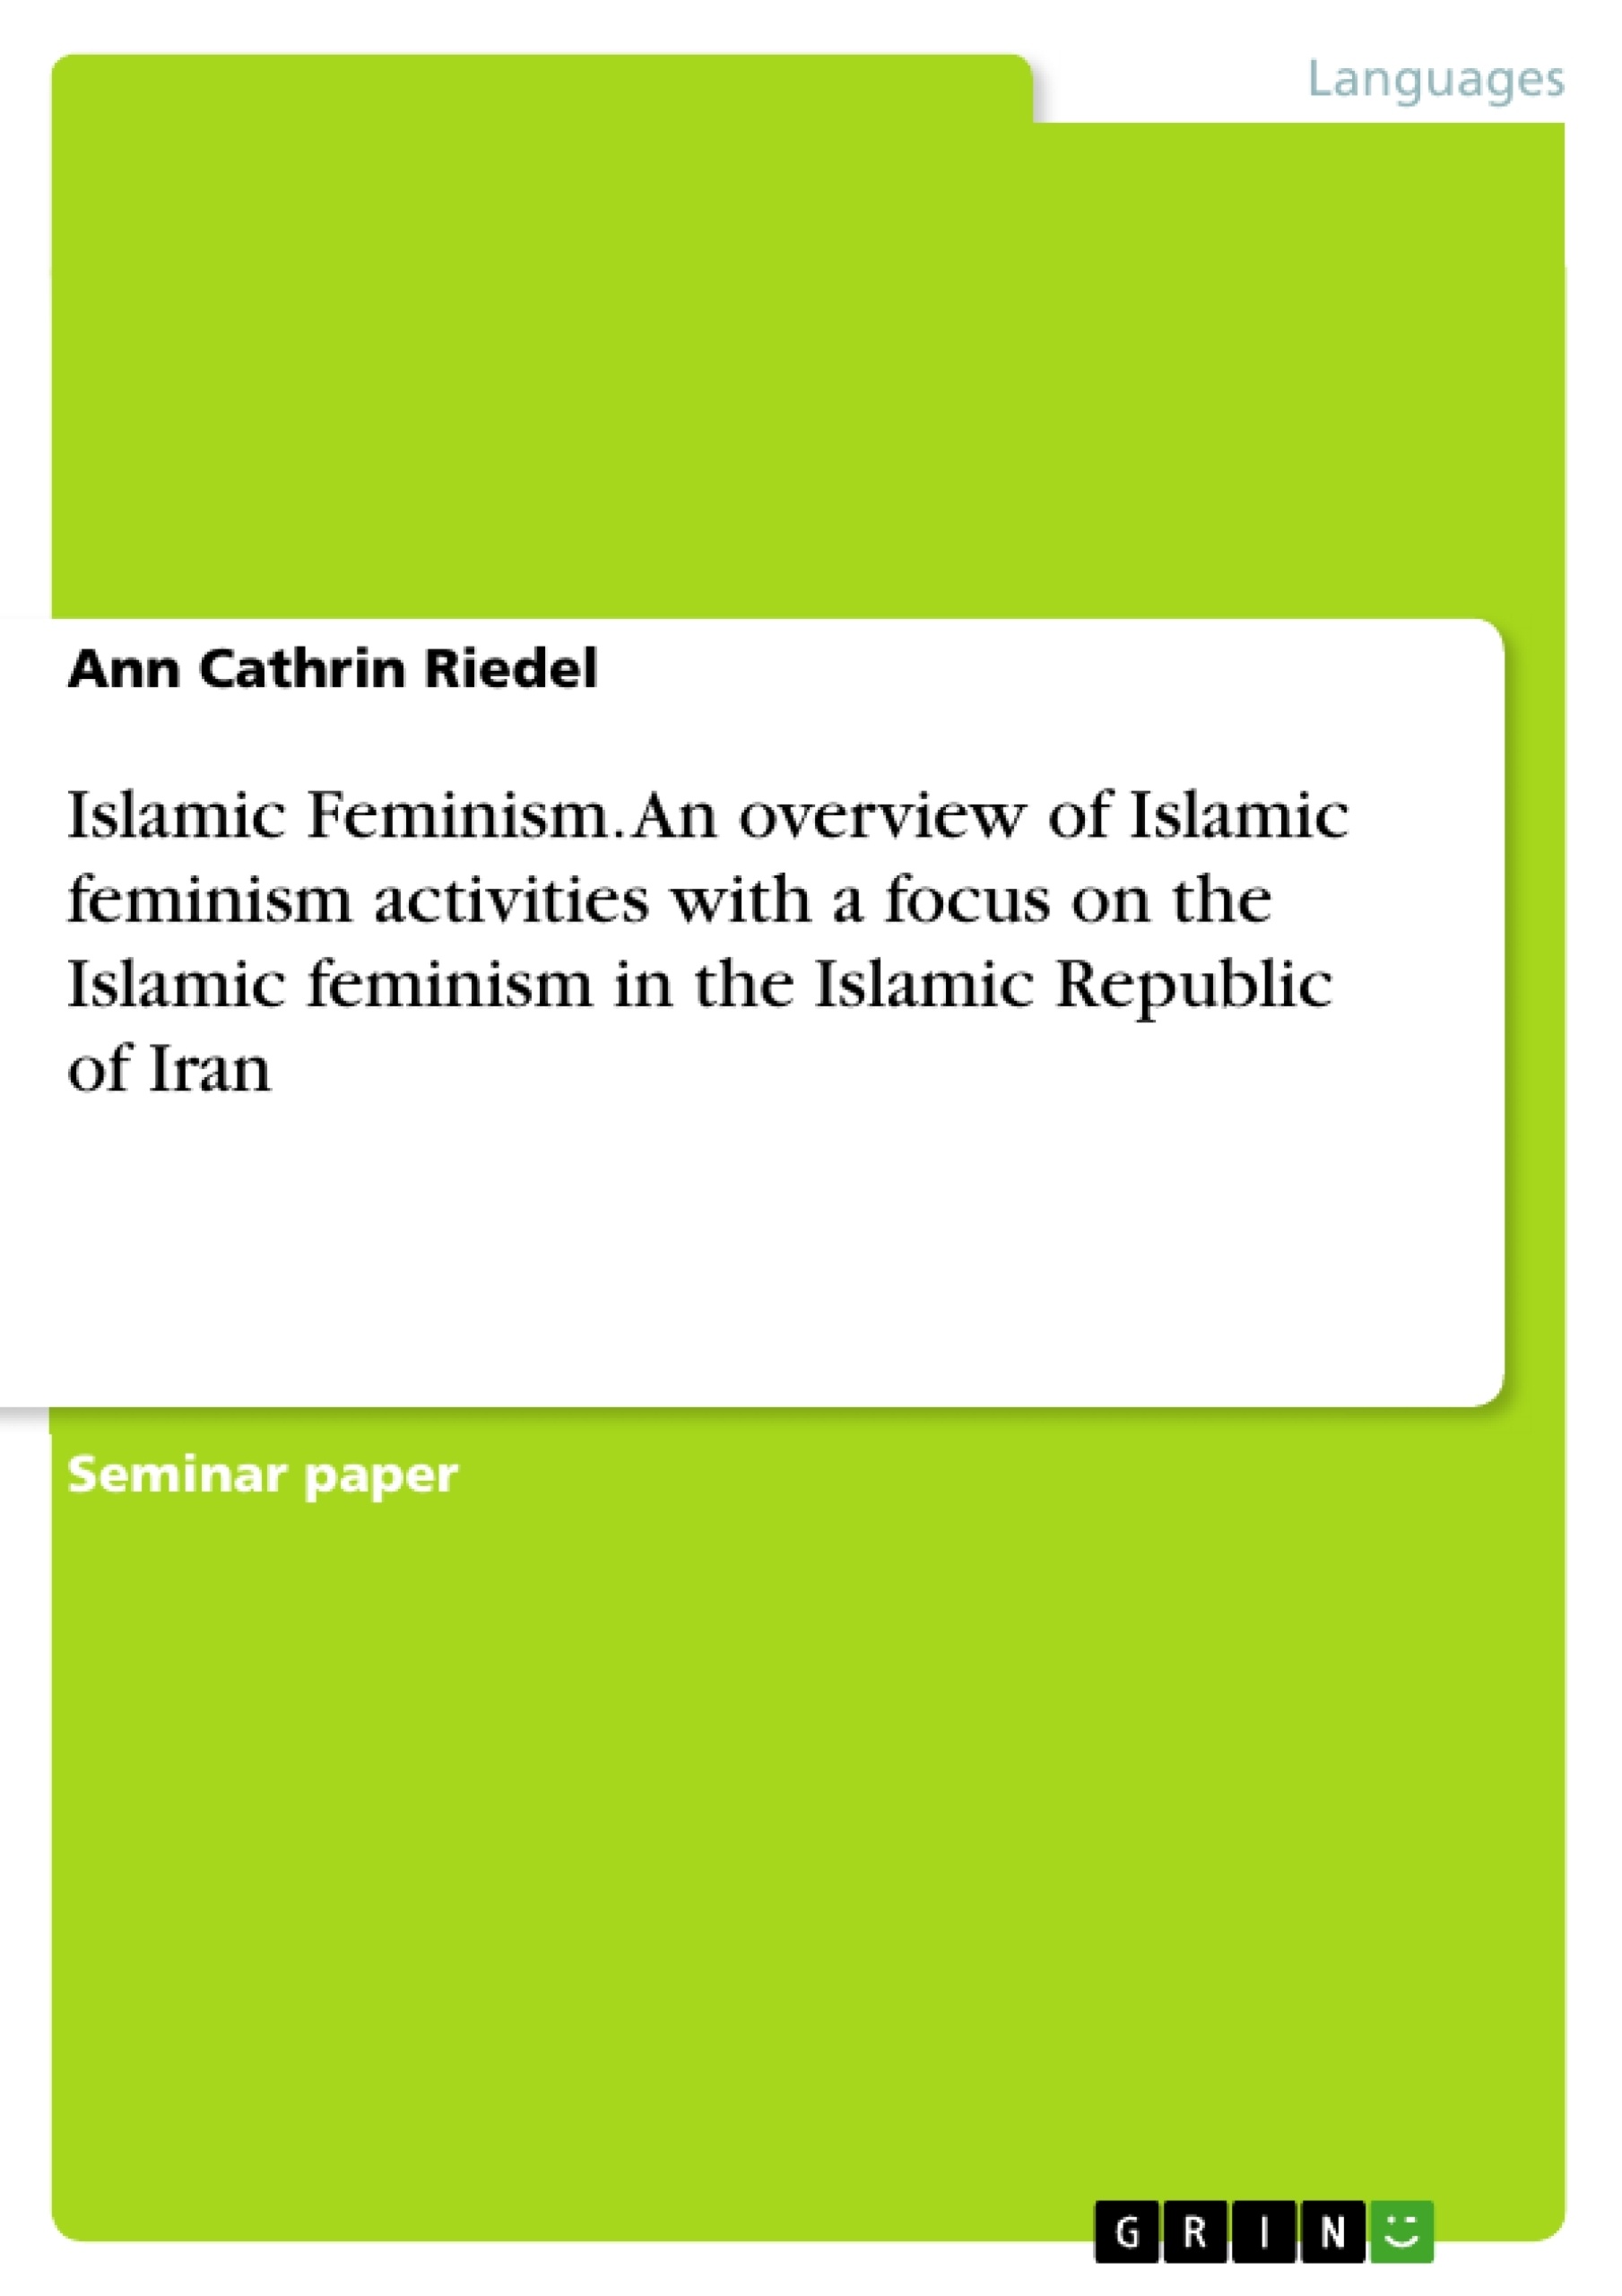 Title: Islamic Feminism. An overview of Islamic feminism activities with a focus on the Islamic feminism in the Islamic Republic of Iran